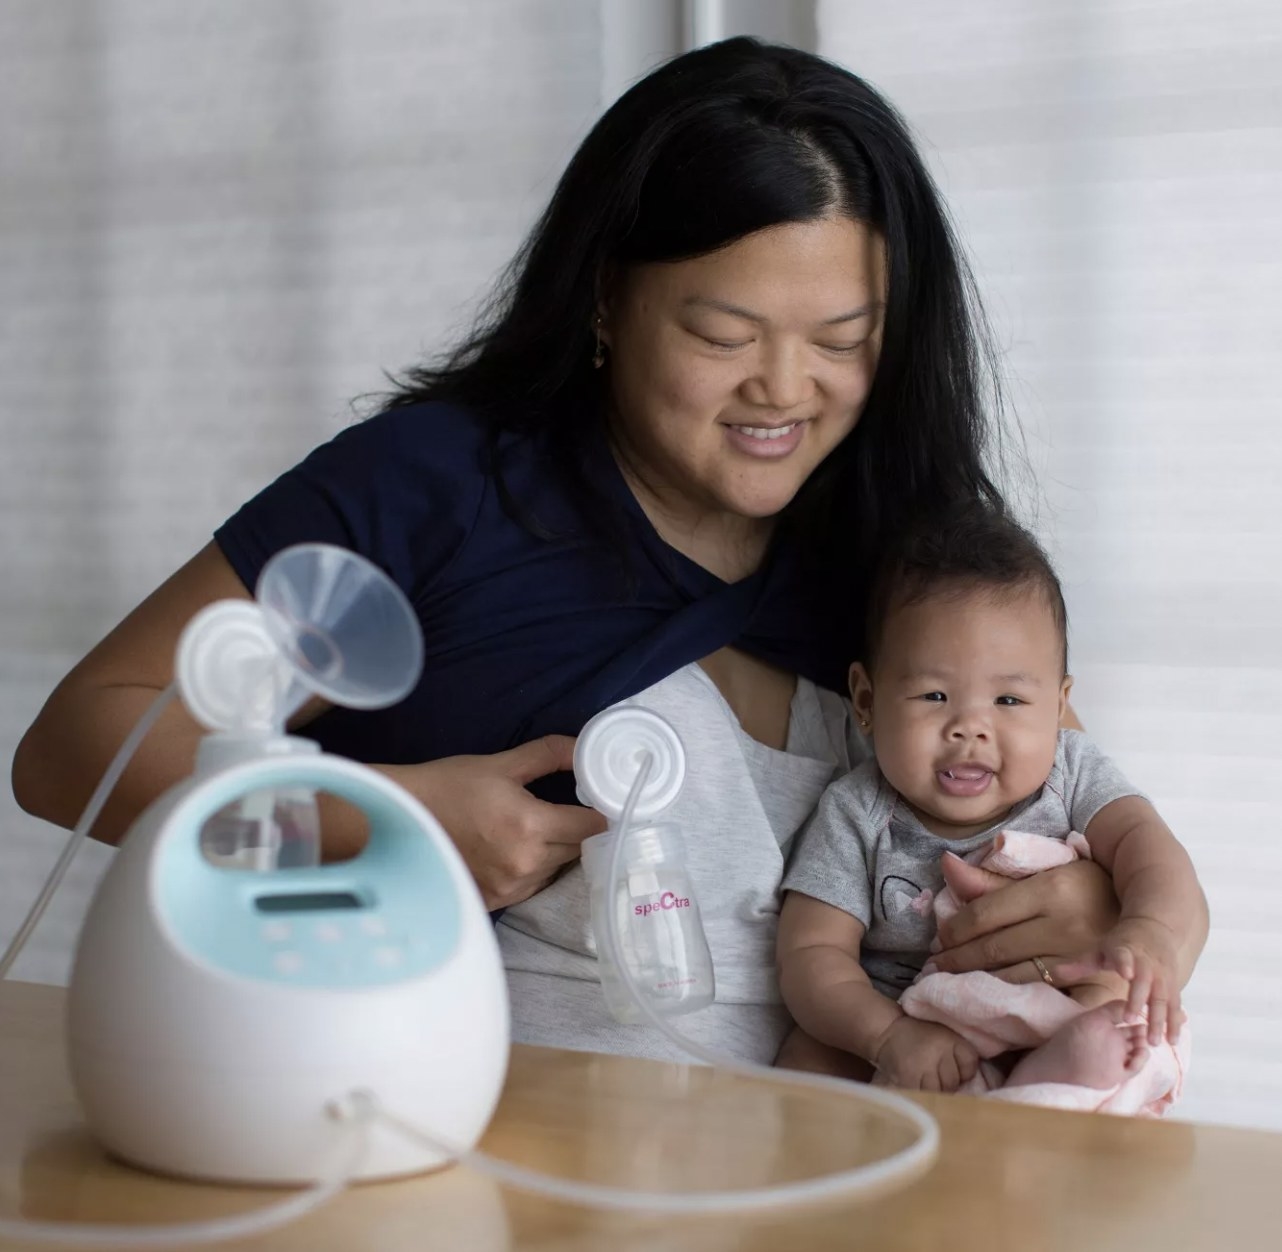 Mom using breast pump with baby